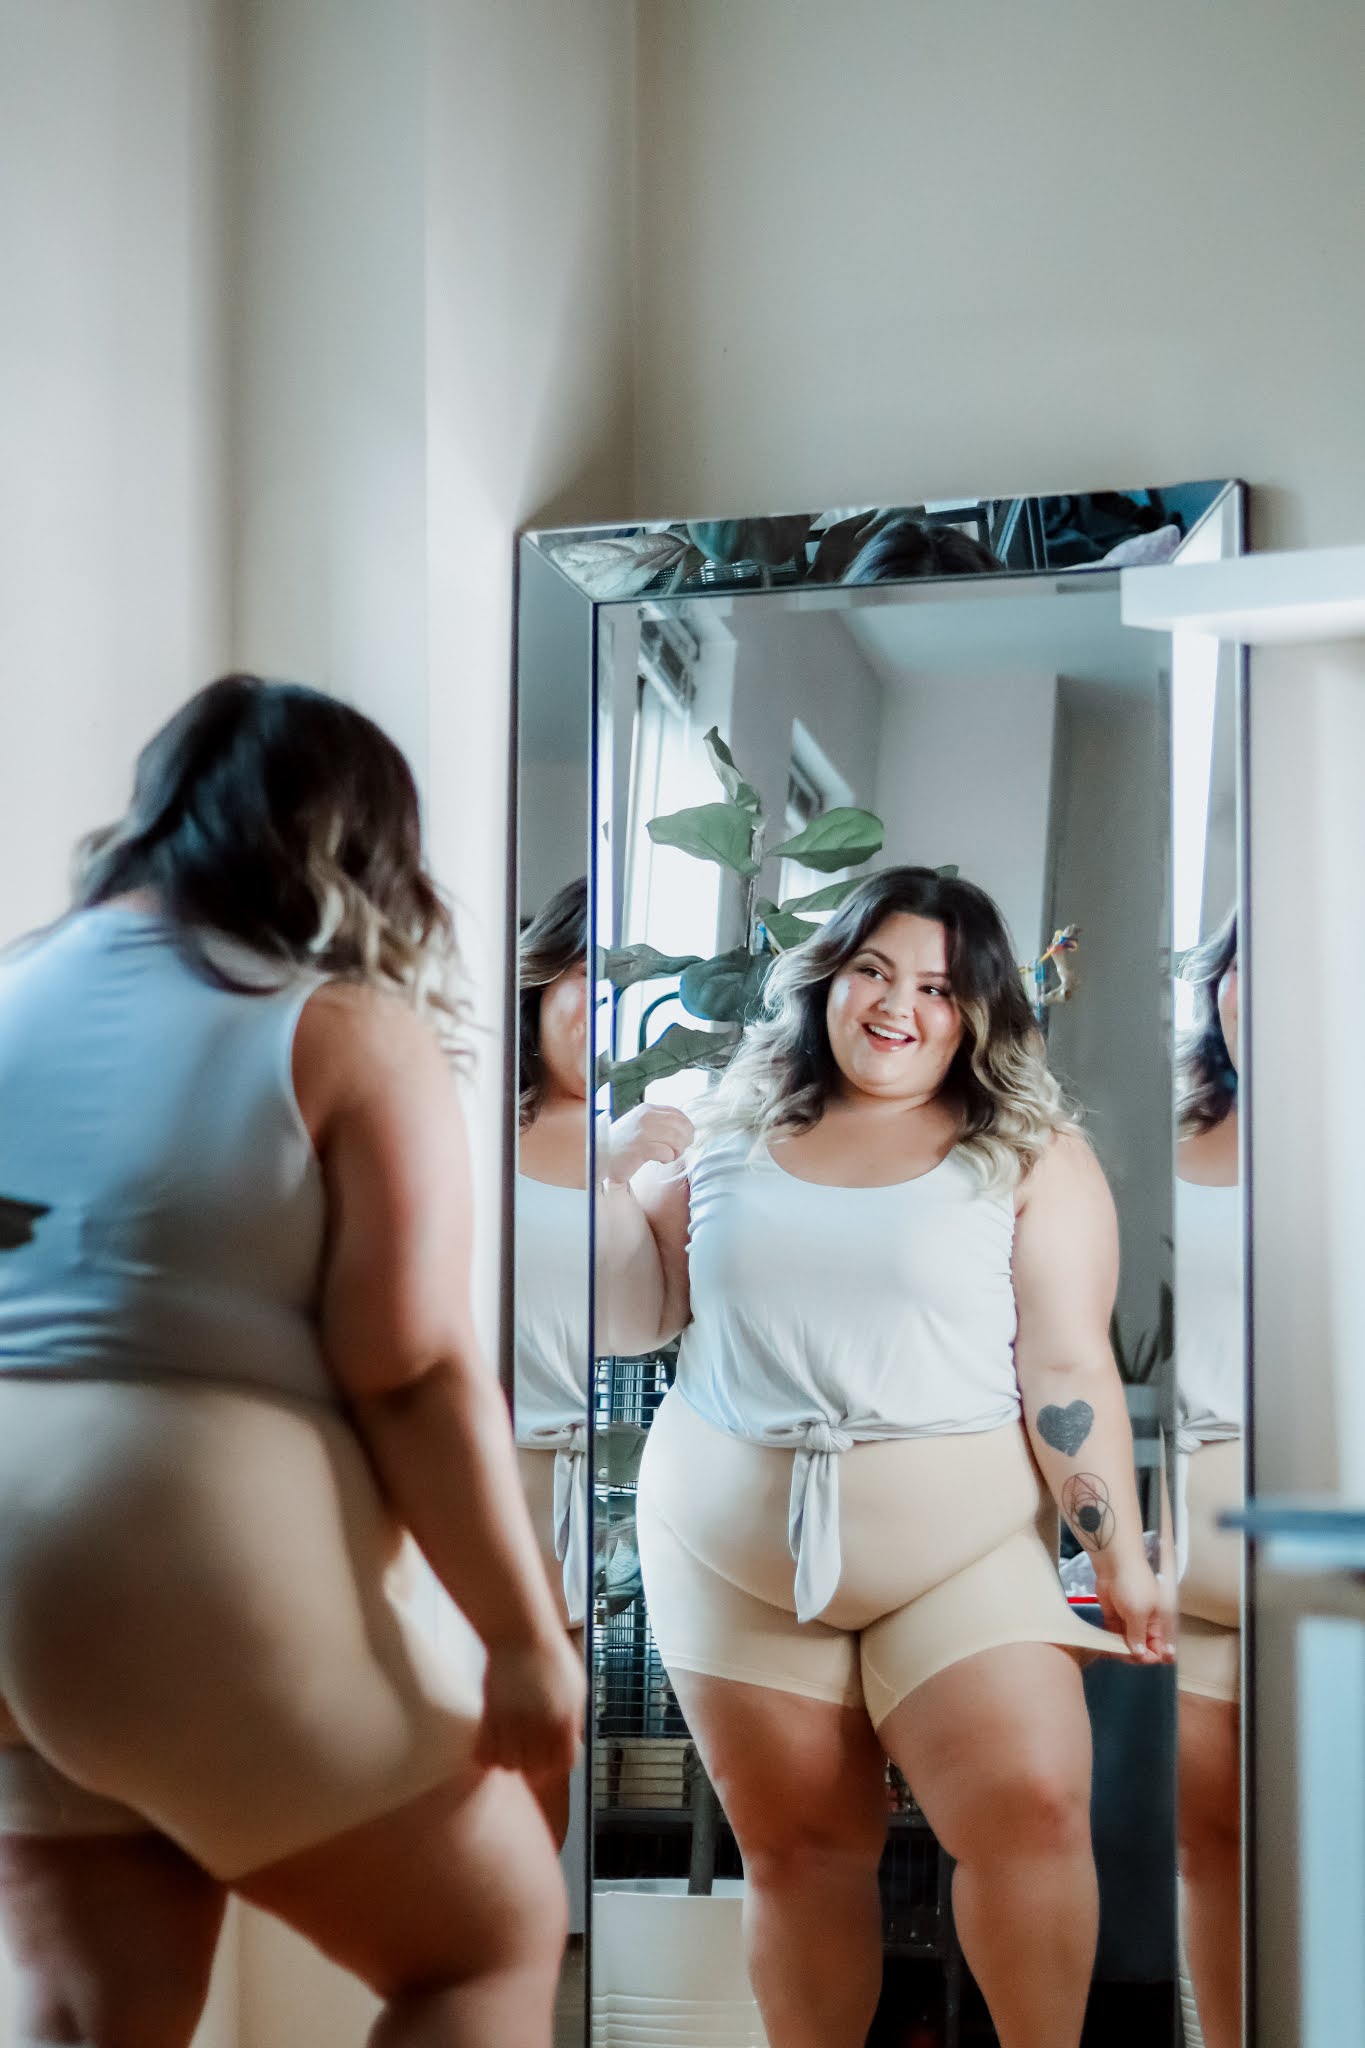 Chicago Plus Size Petite Fashion Blogger Natalie in the City wears Thigh Society's anti chafe shorts.